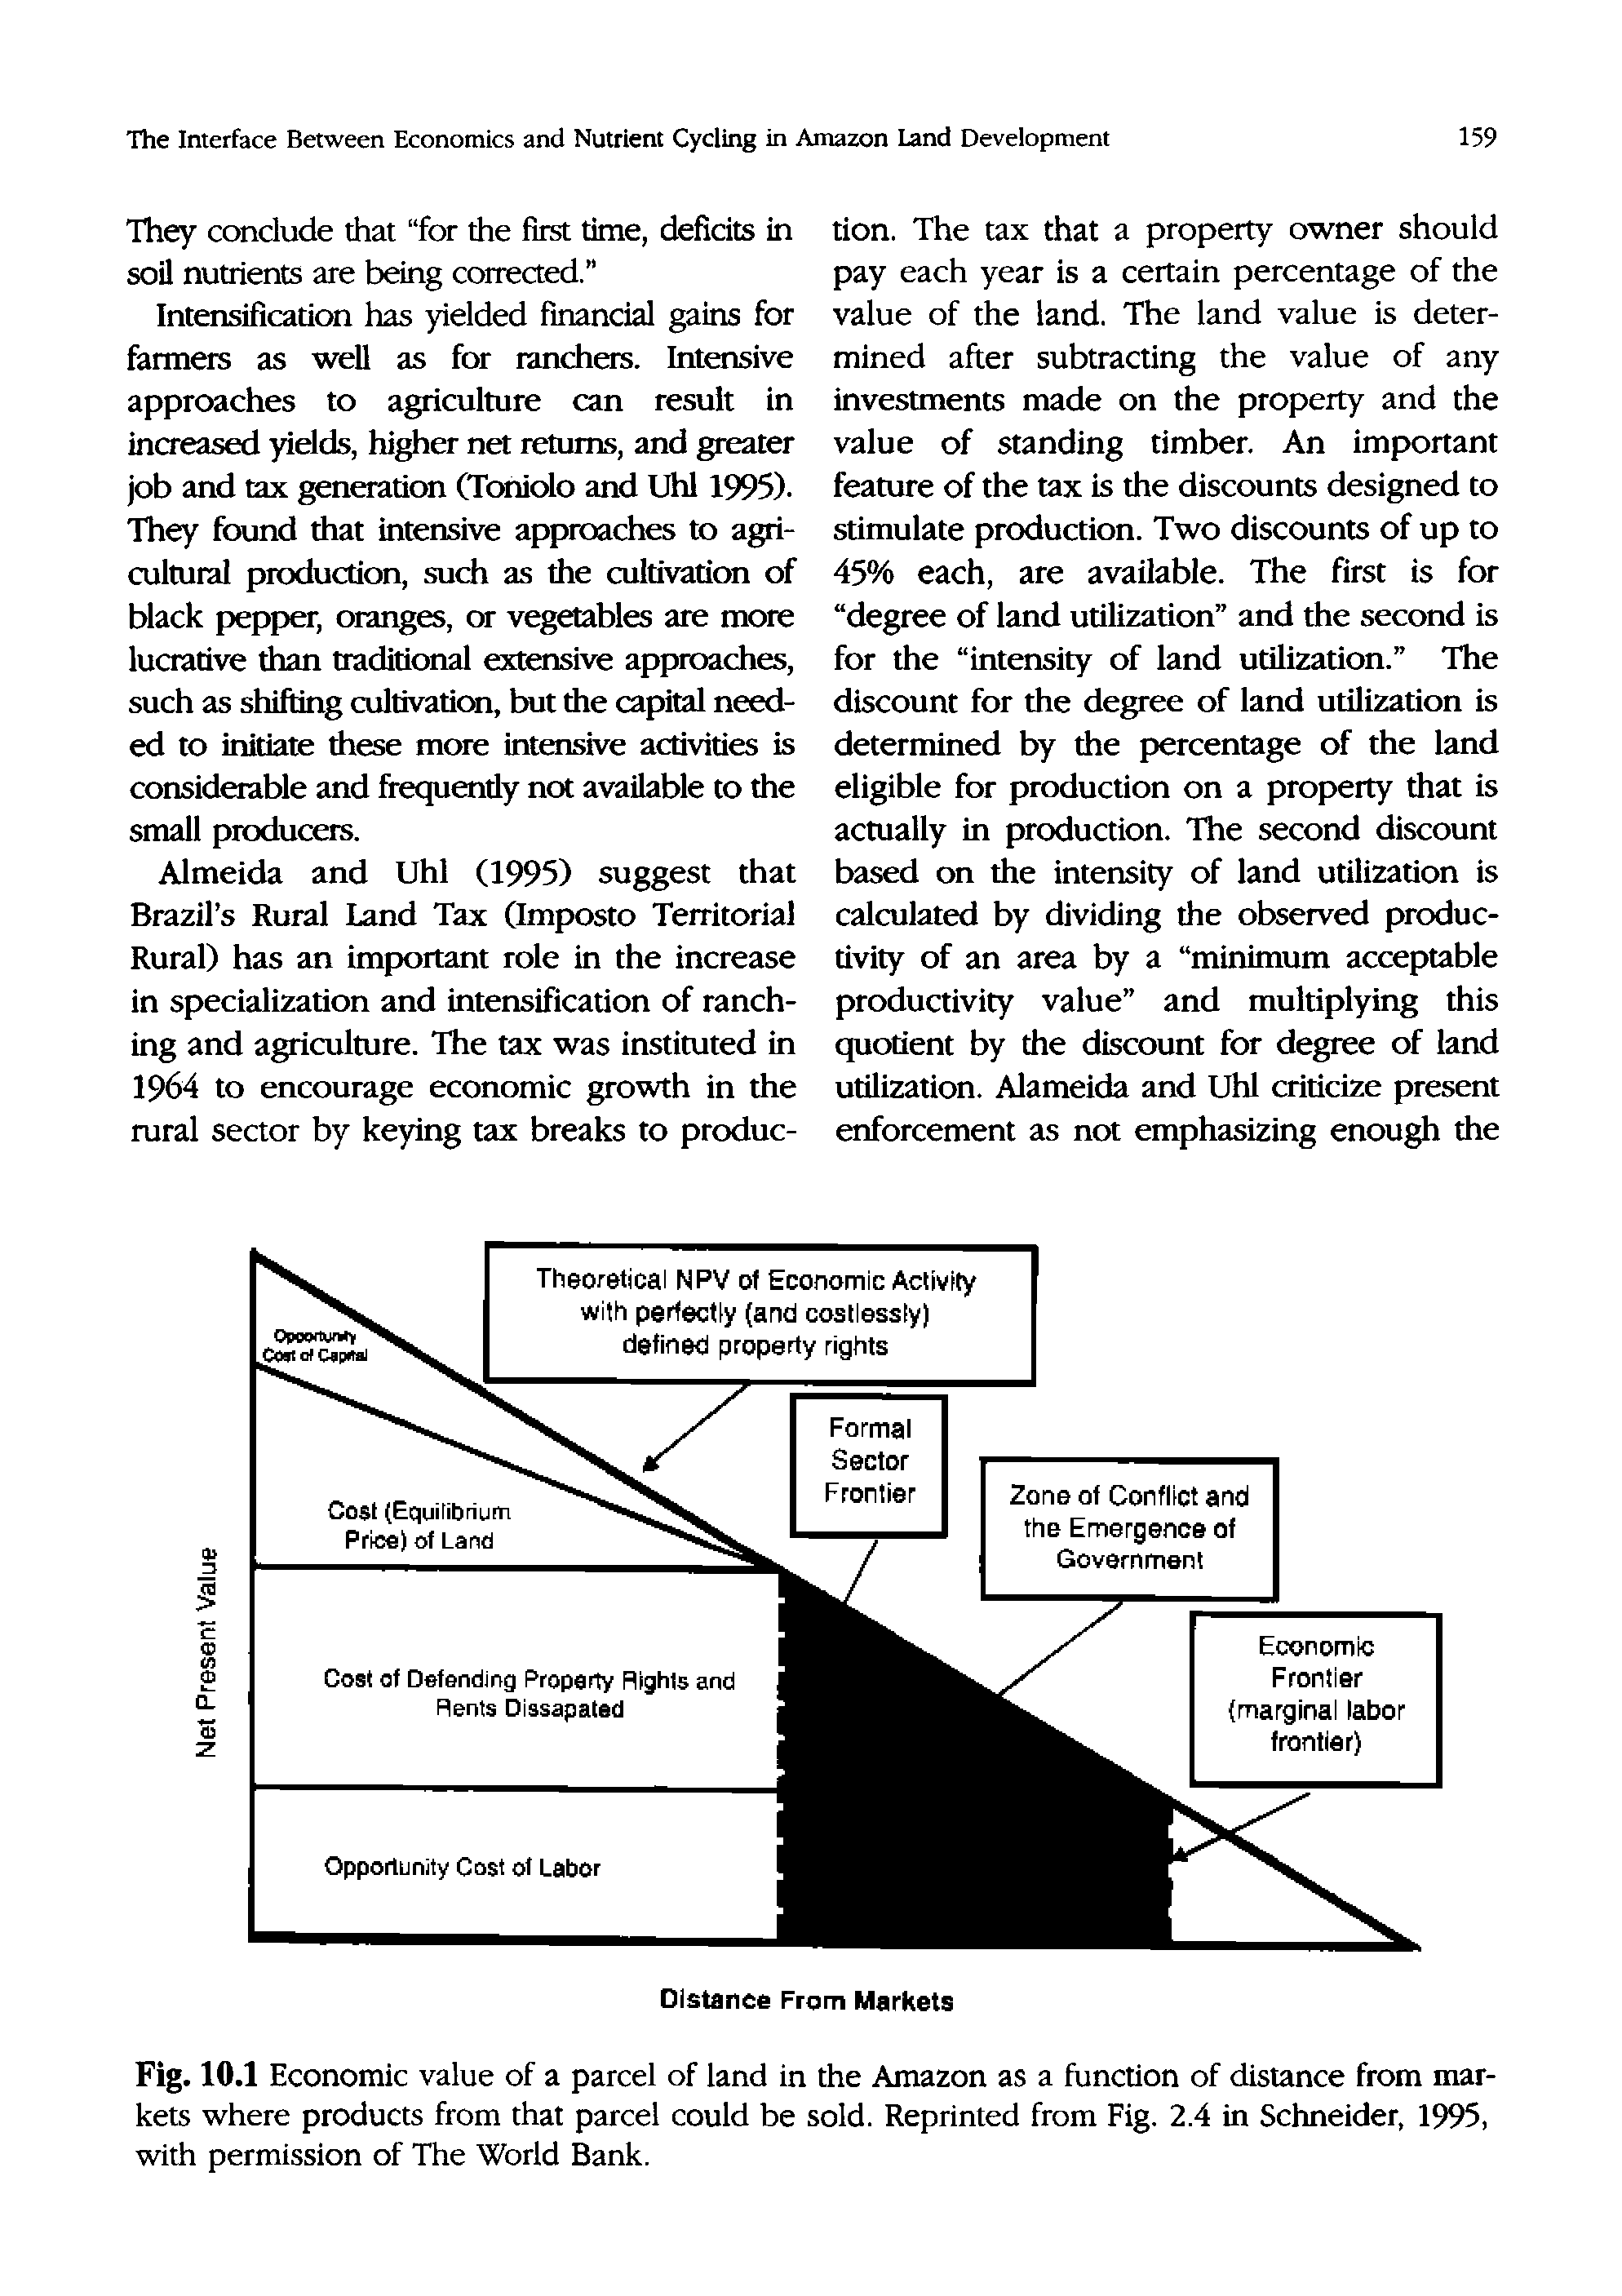 Fig. 10.1 Economic value of a parcel of land in the Amazon as a function of distance from markets where products from that parcel could be sold. Reprinted from Fig. 2.4 in Schneider, 1995, with permission of The World Bank.